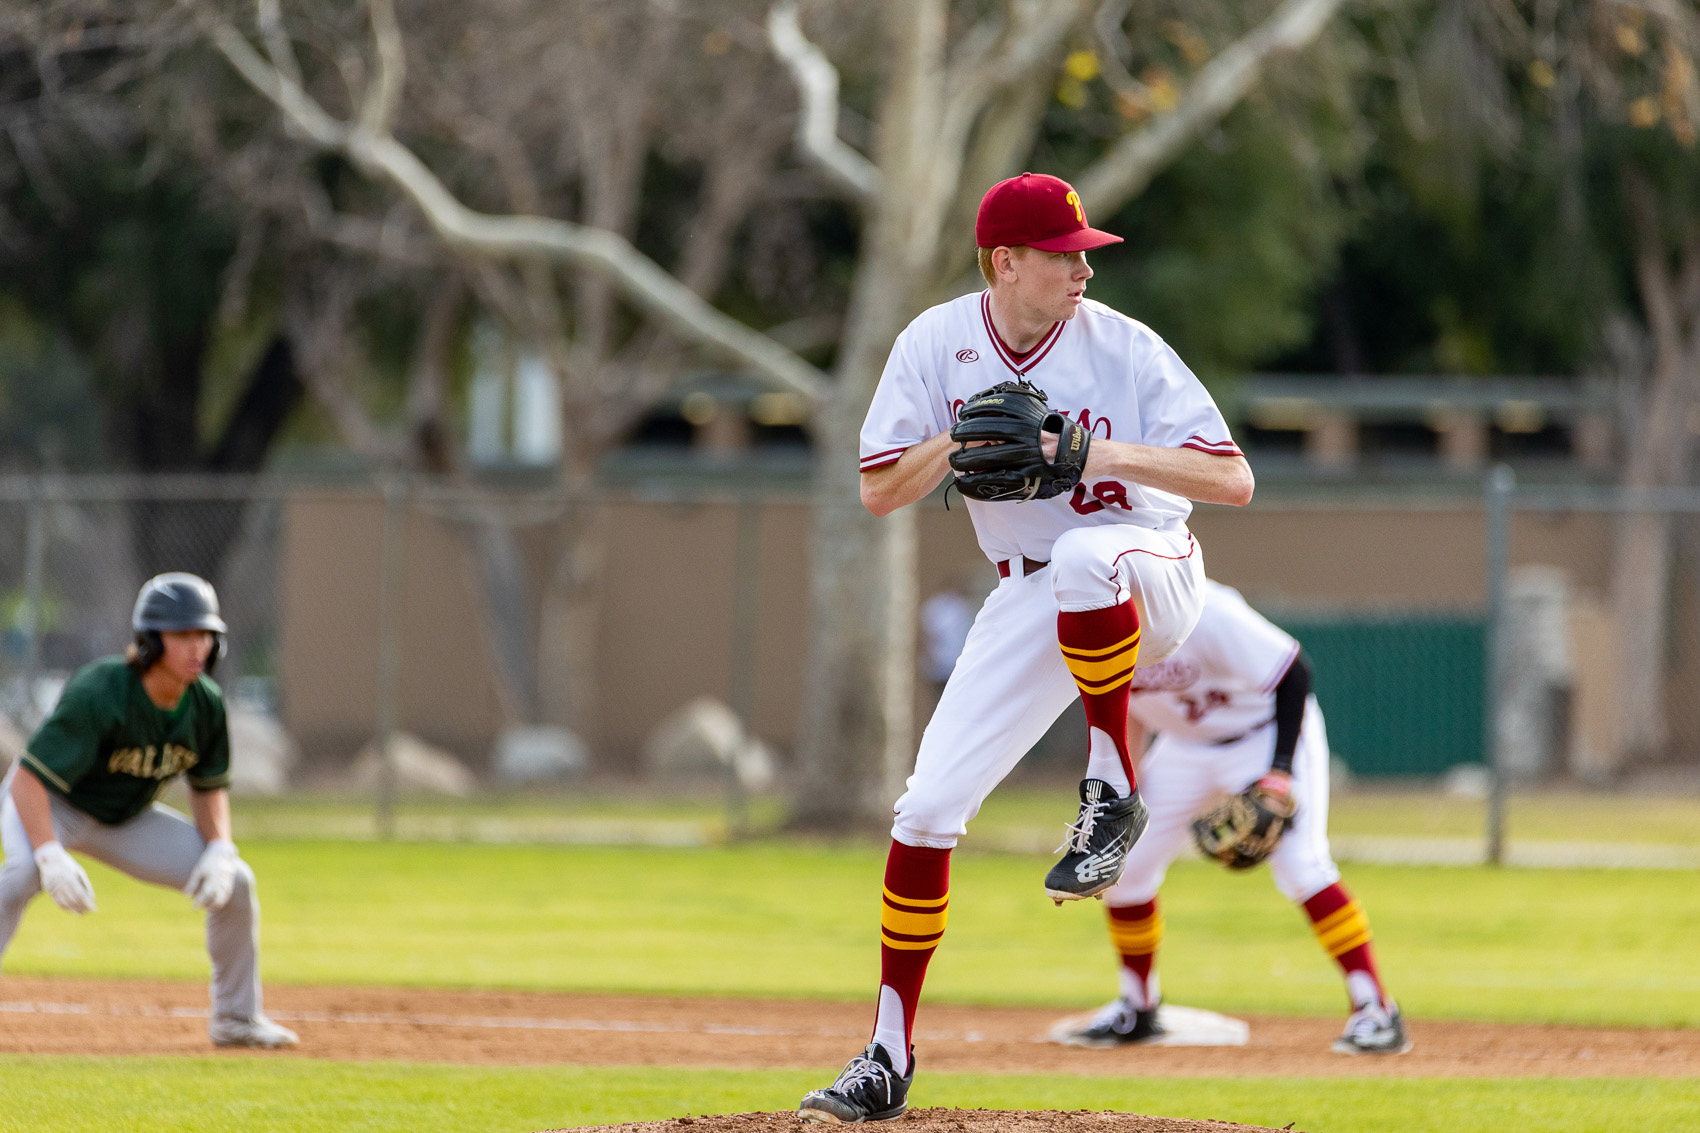 Kyle Noell fires a pitch in PCC's home opener on Thursday (photo by Ezekiel Isbell).